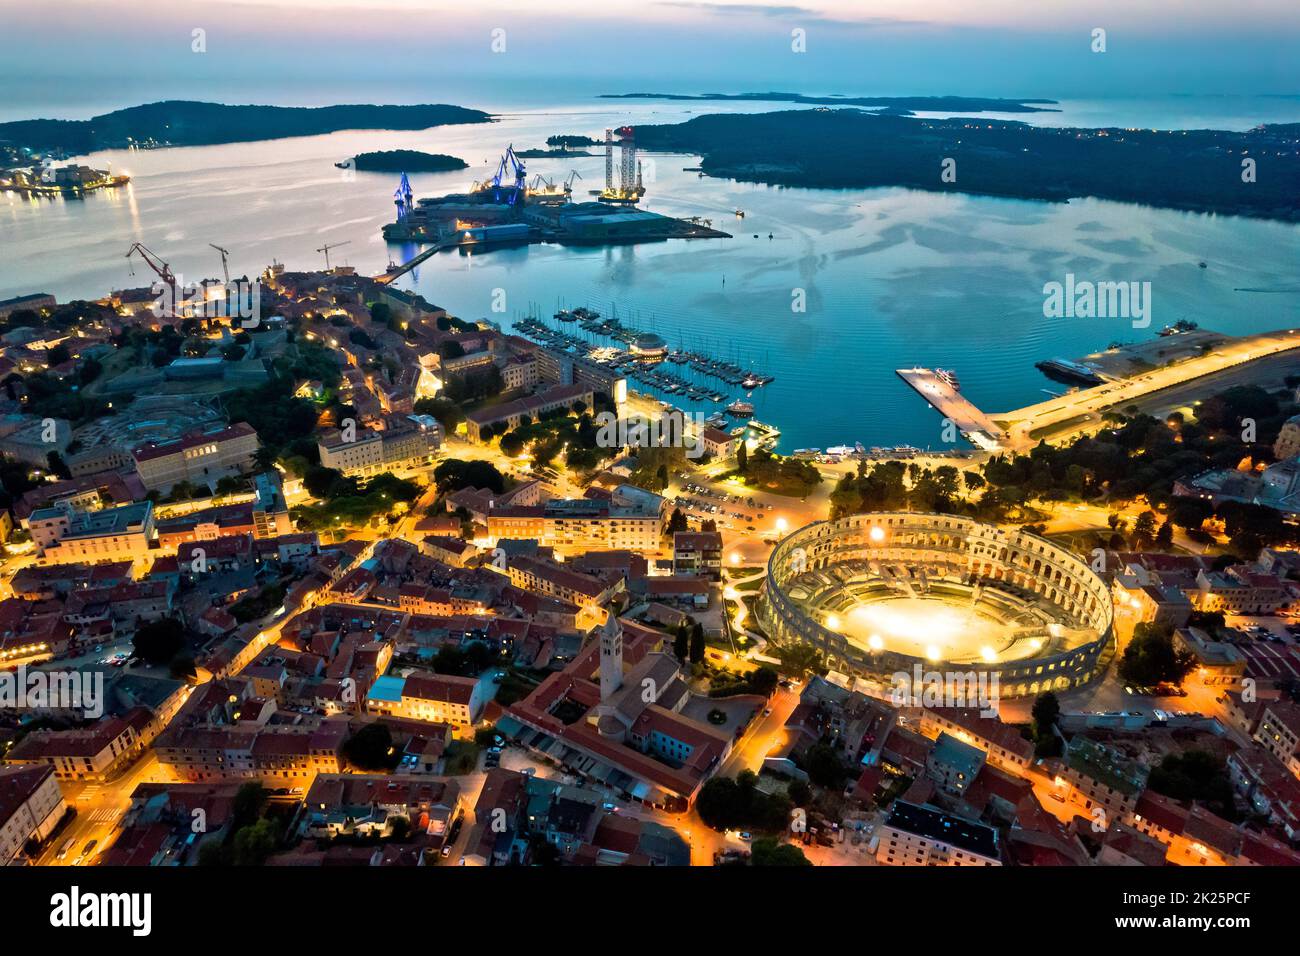 Arena Pula. Ancient Roman amphitheatre and bay of Pula aerial evening view Stock Photo